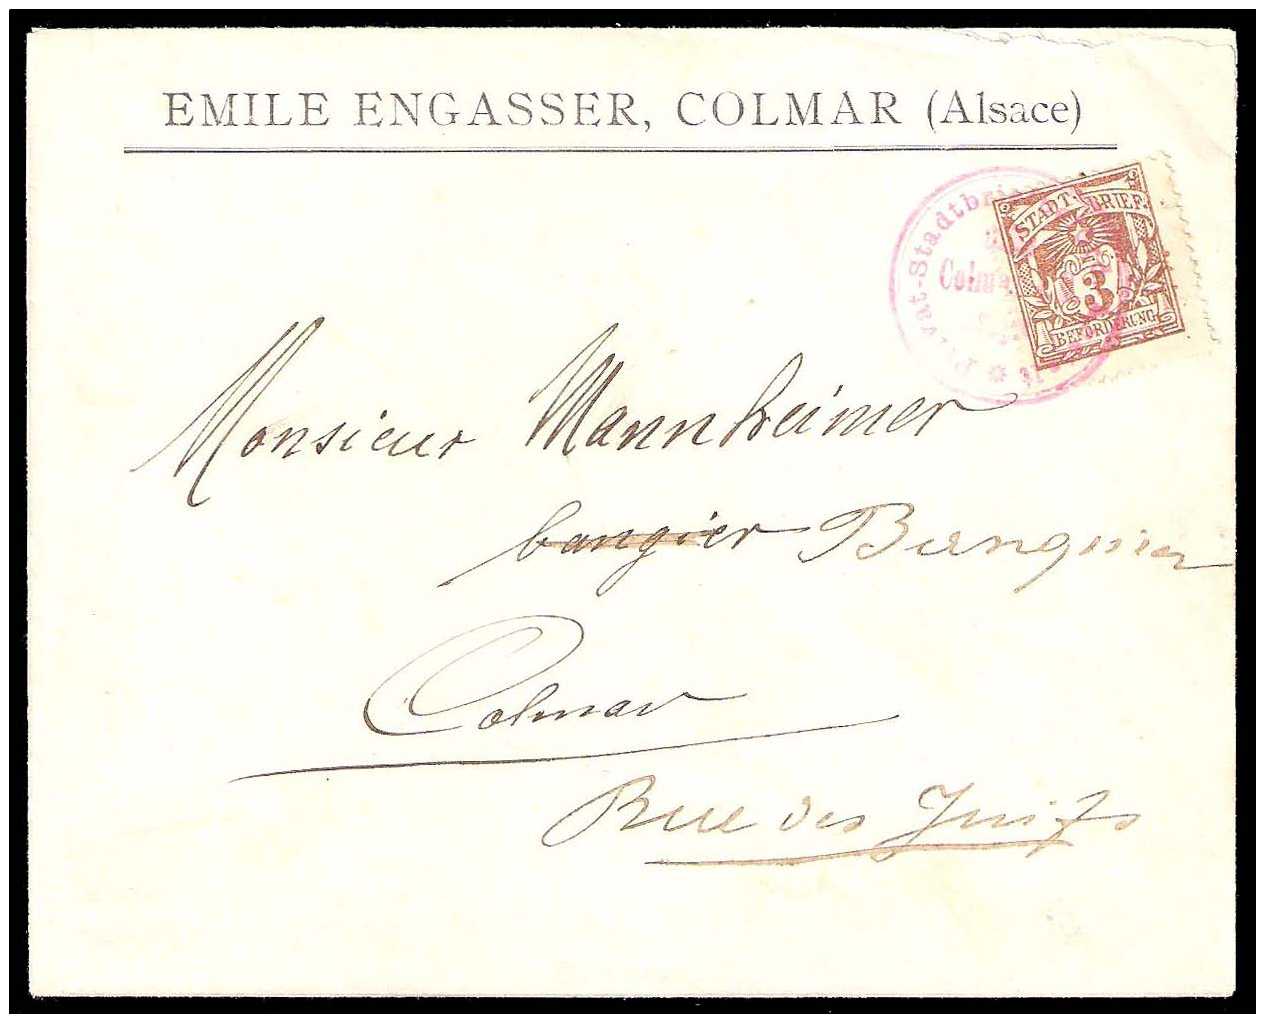 5.1896 Germany Private Mail Colmar Mi 1 collection 03